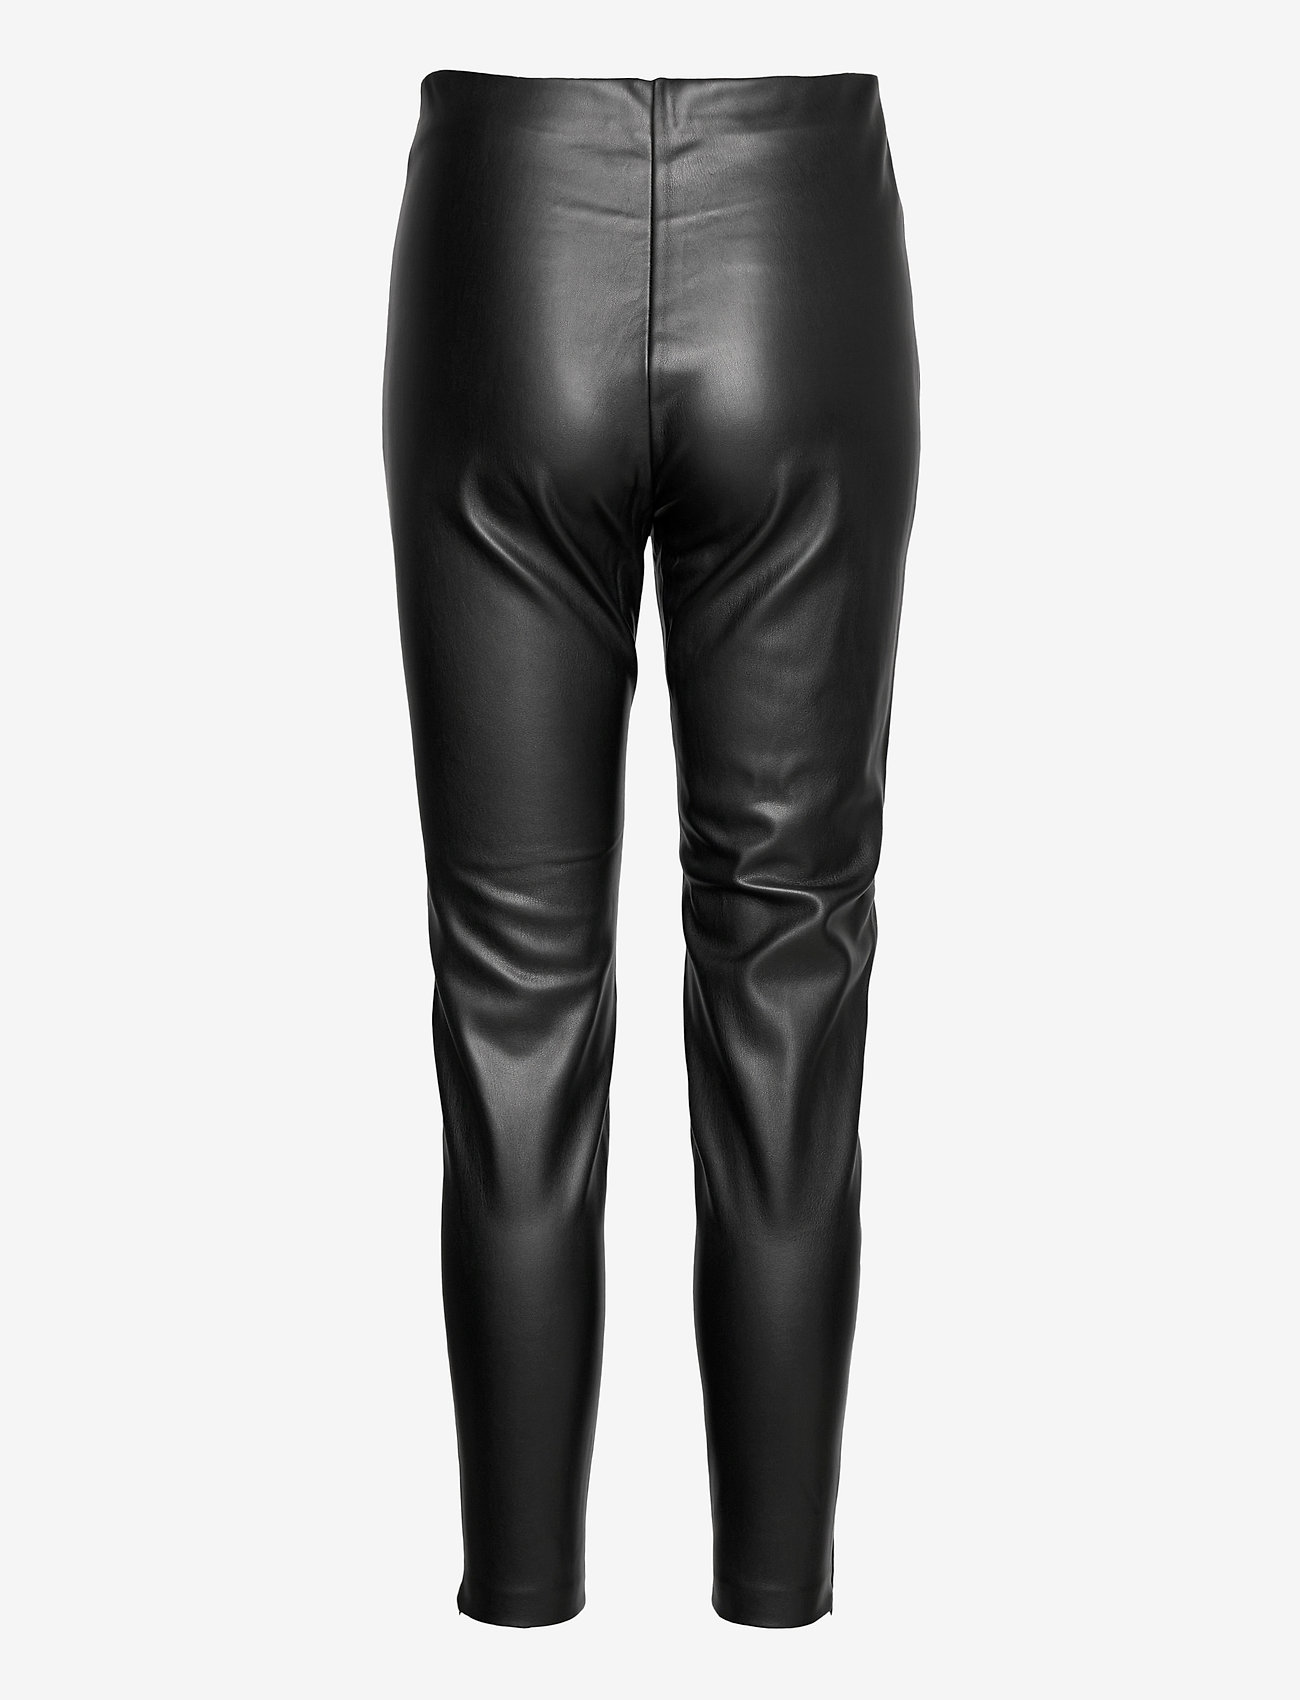 FREE/QUENT Fqharley-ankle-le - Leather trousers | Boozt.com